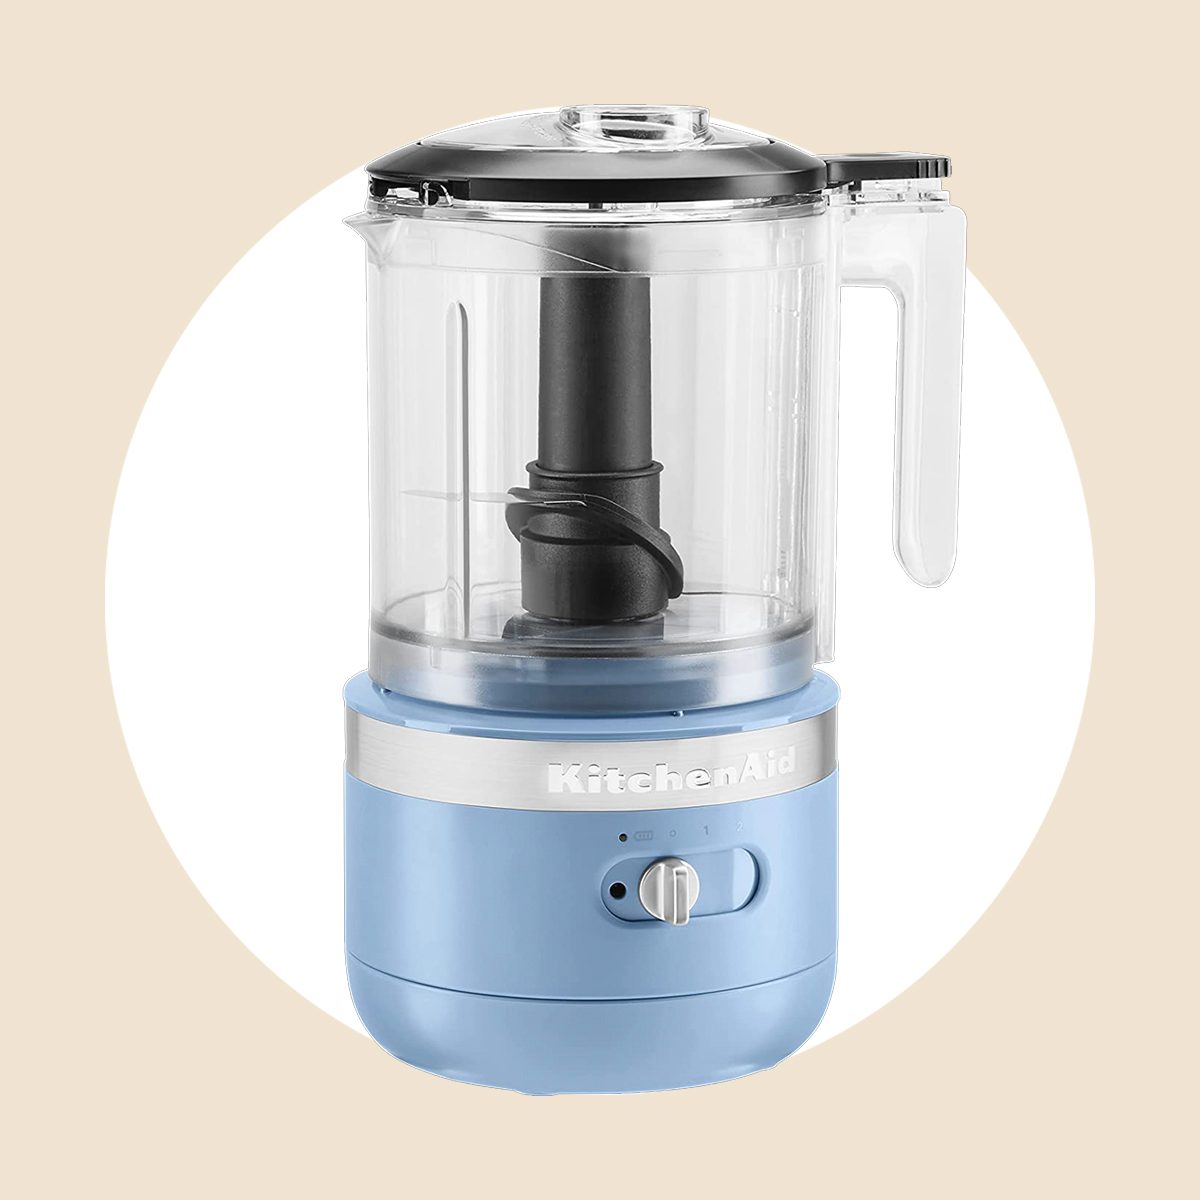 10 Best Mini Food Processors, According to Reviews